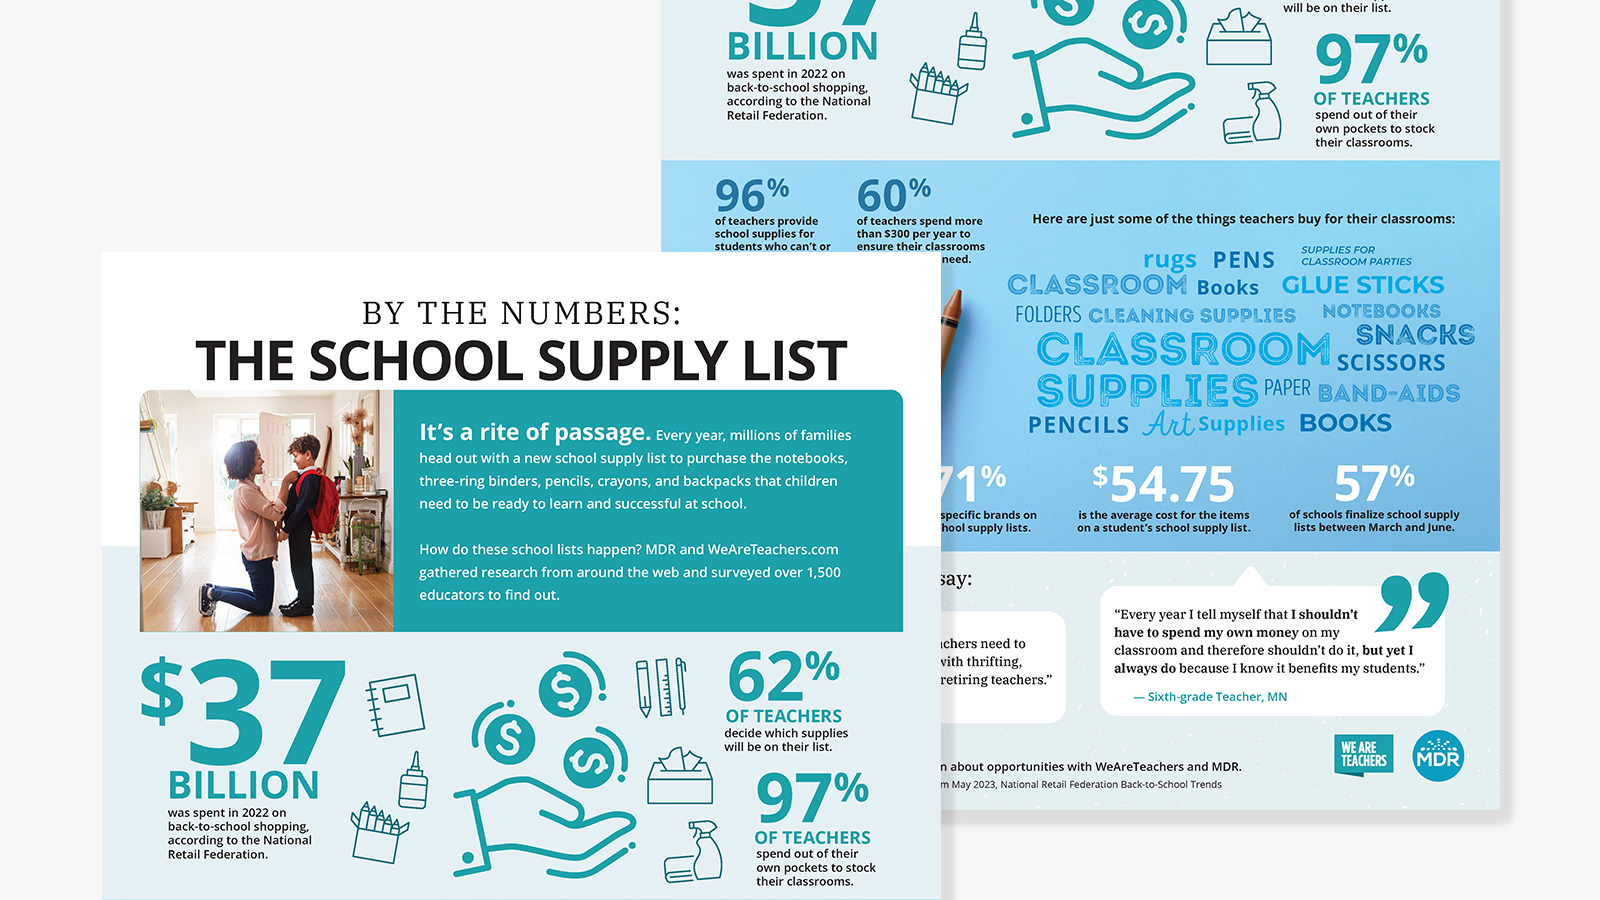 How Do School Supply Lists Get Created?